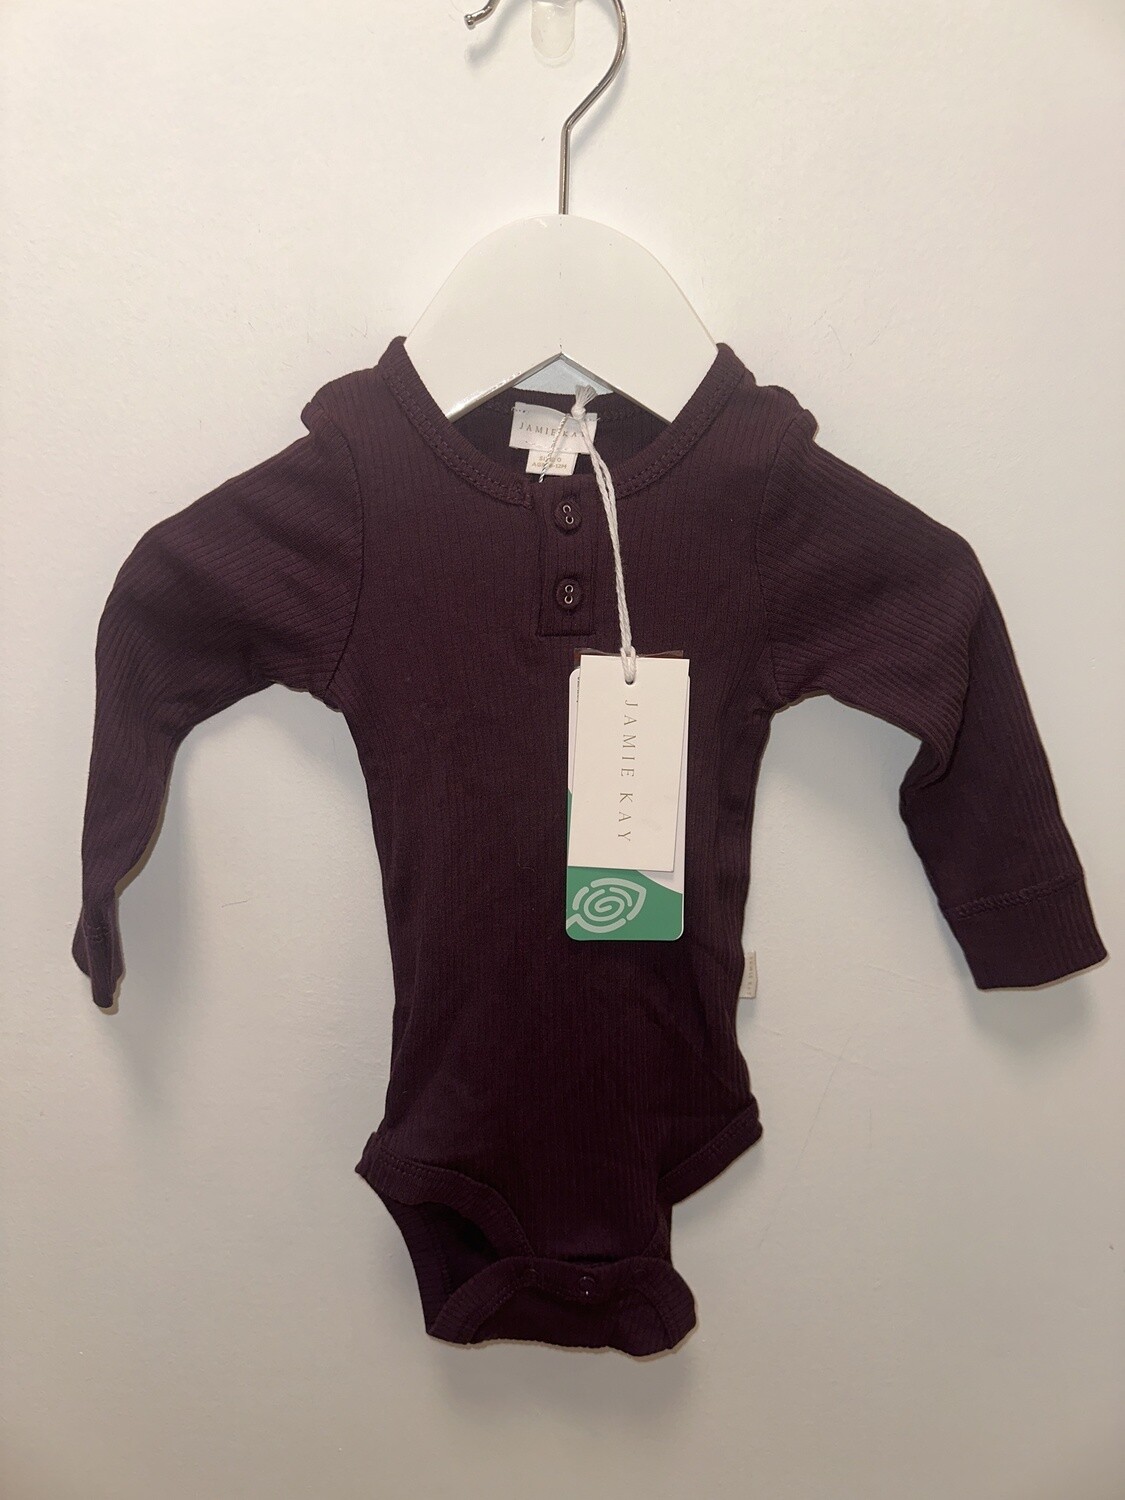 New with Tags - Jamie Kay - Long Sleeve - 6-12 Months - PWE571